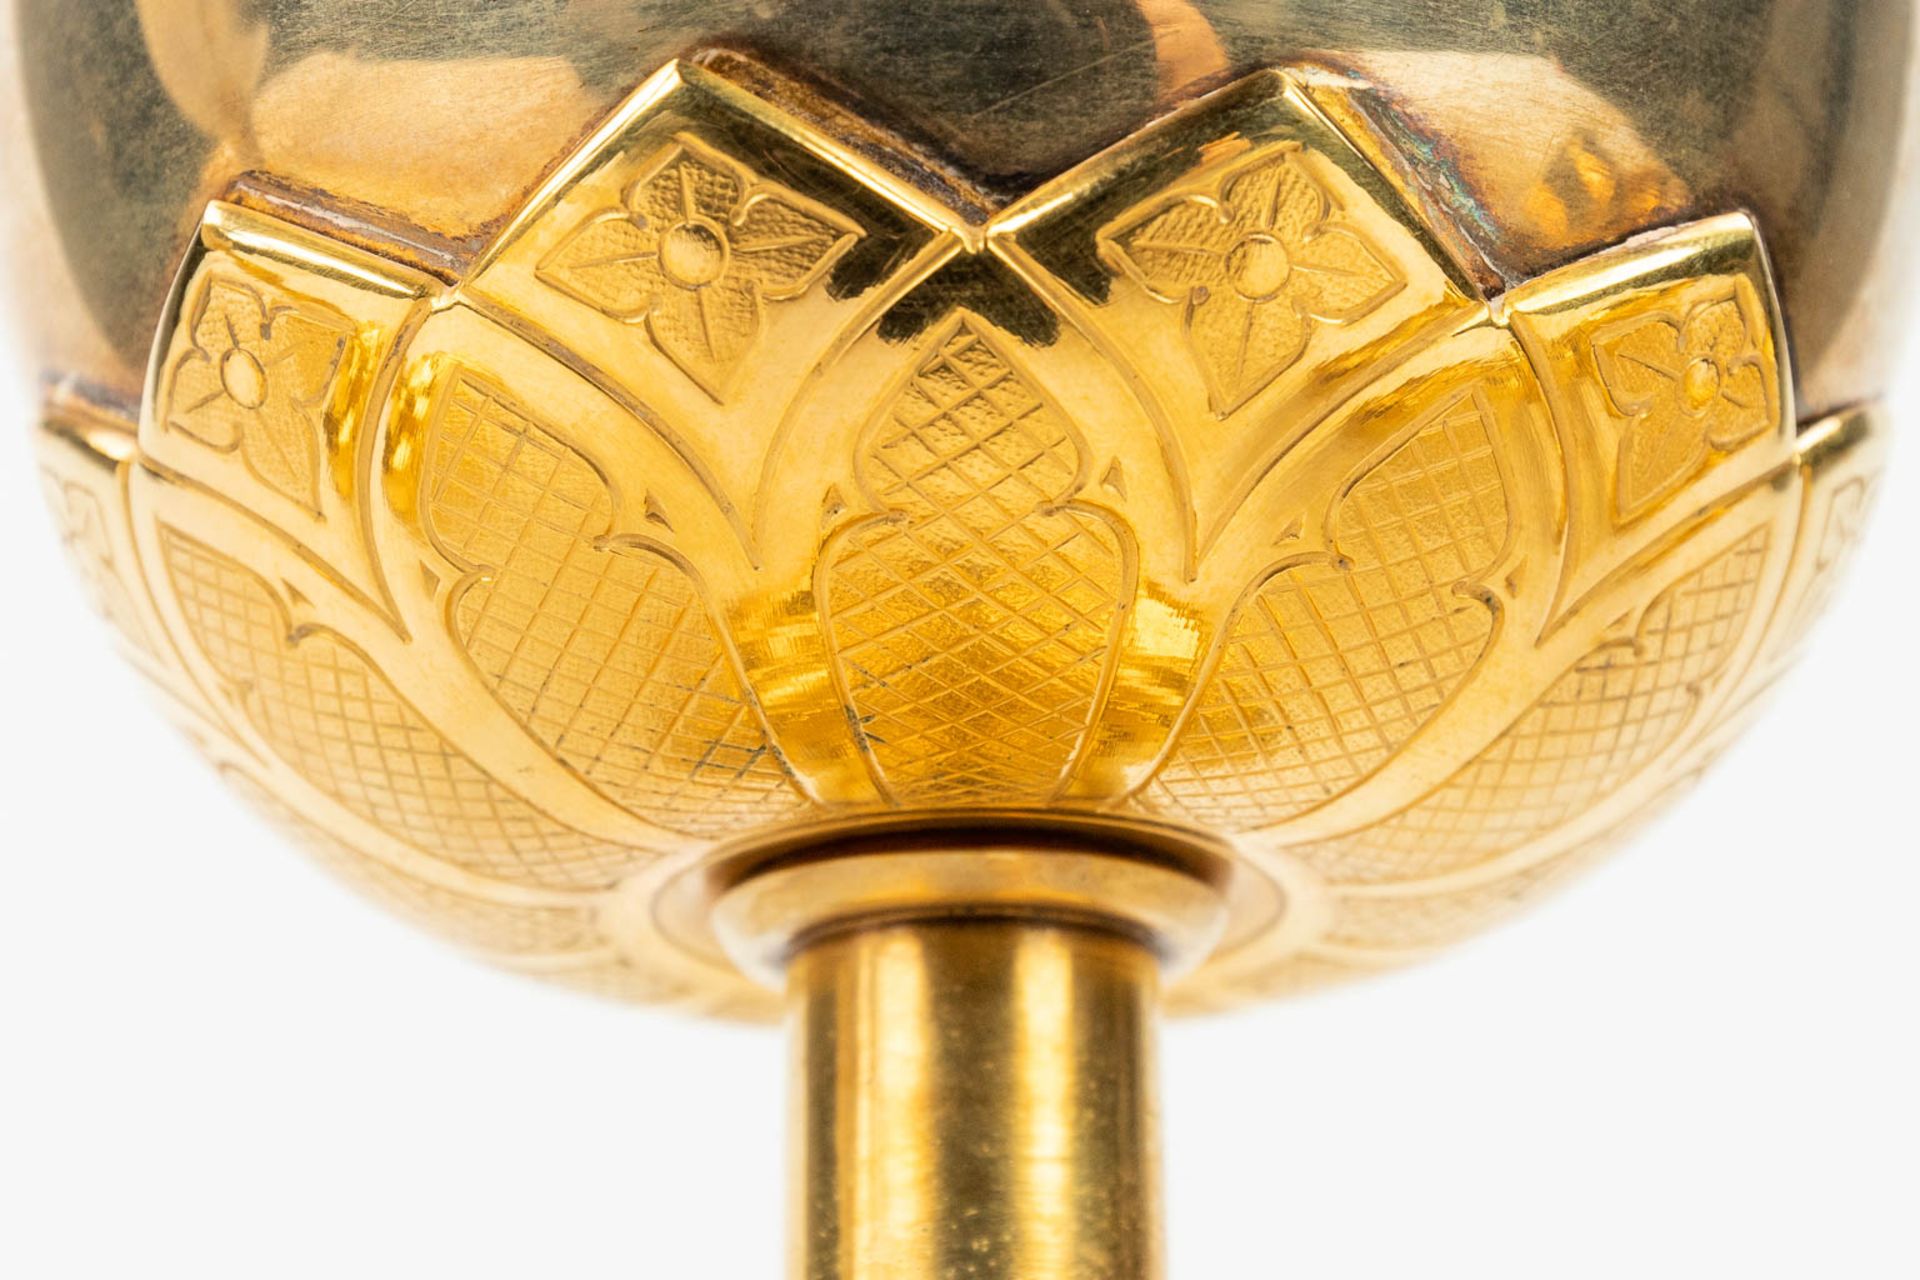 A collection of 4 large ciboria and a chalice made of silver and gold plated metal. - Image 24 of 24